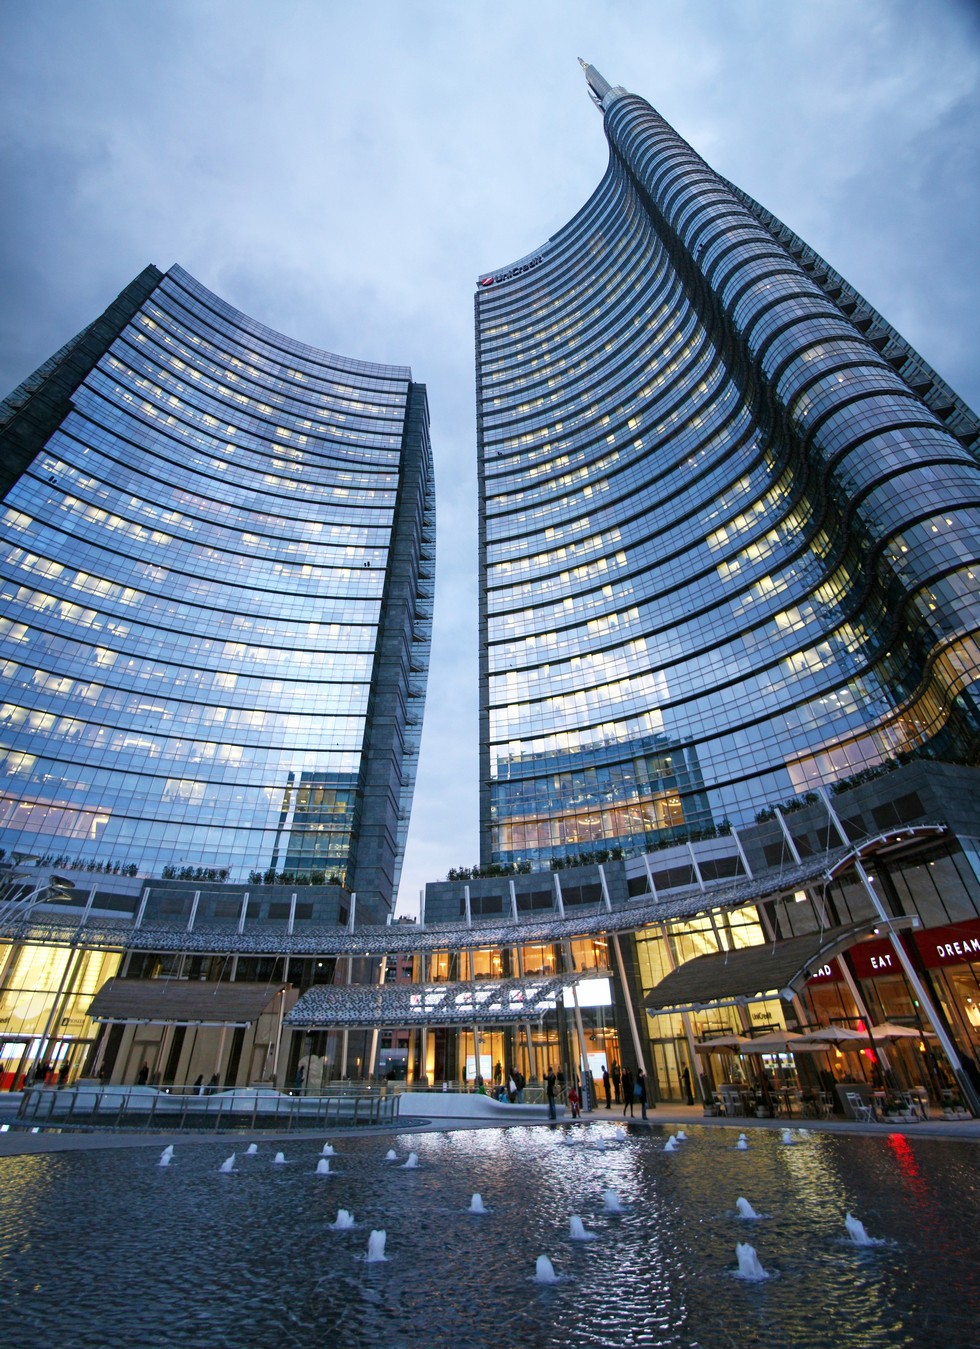 Milan City Guide - What to do in Milan – UniCredit Tower